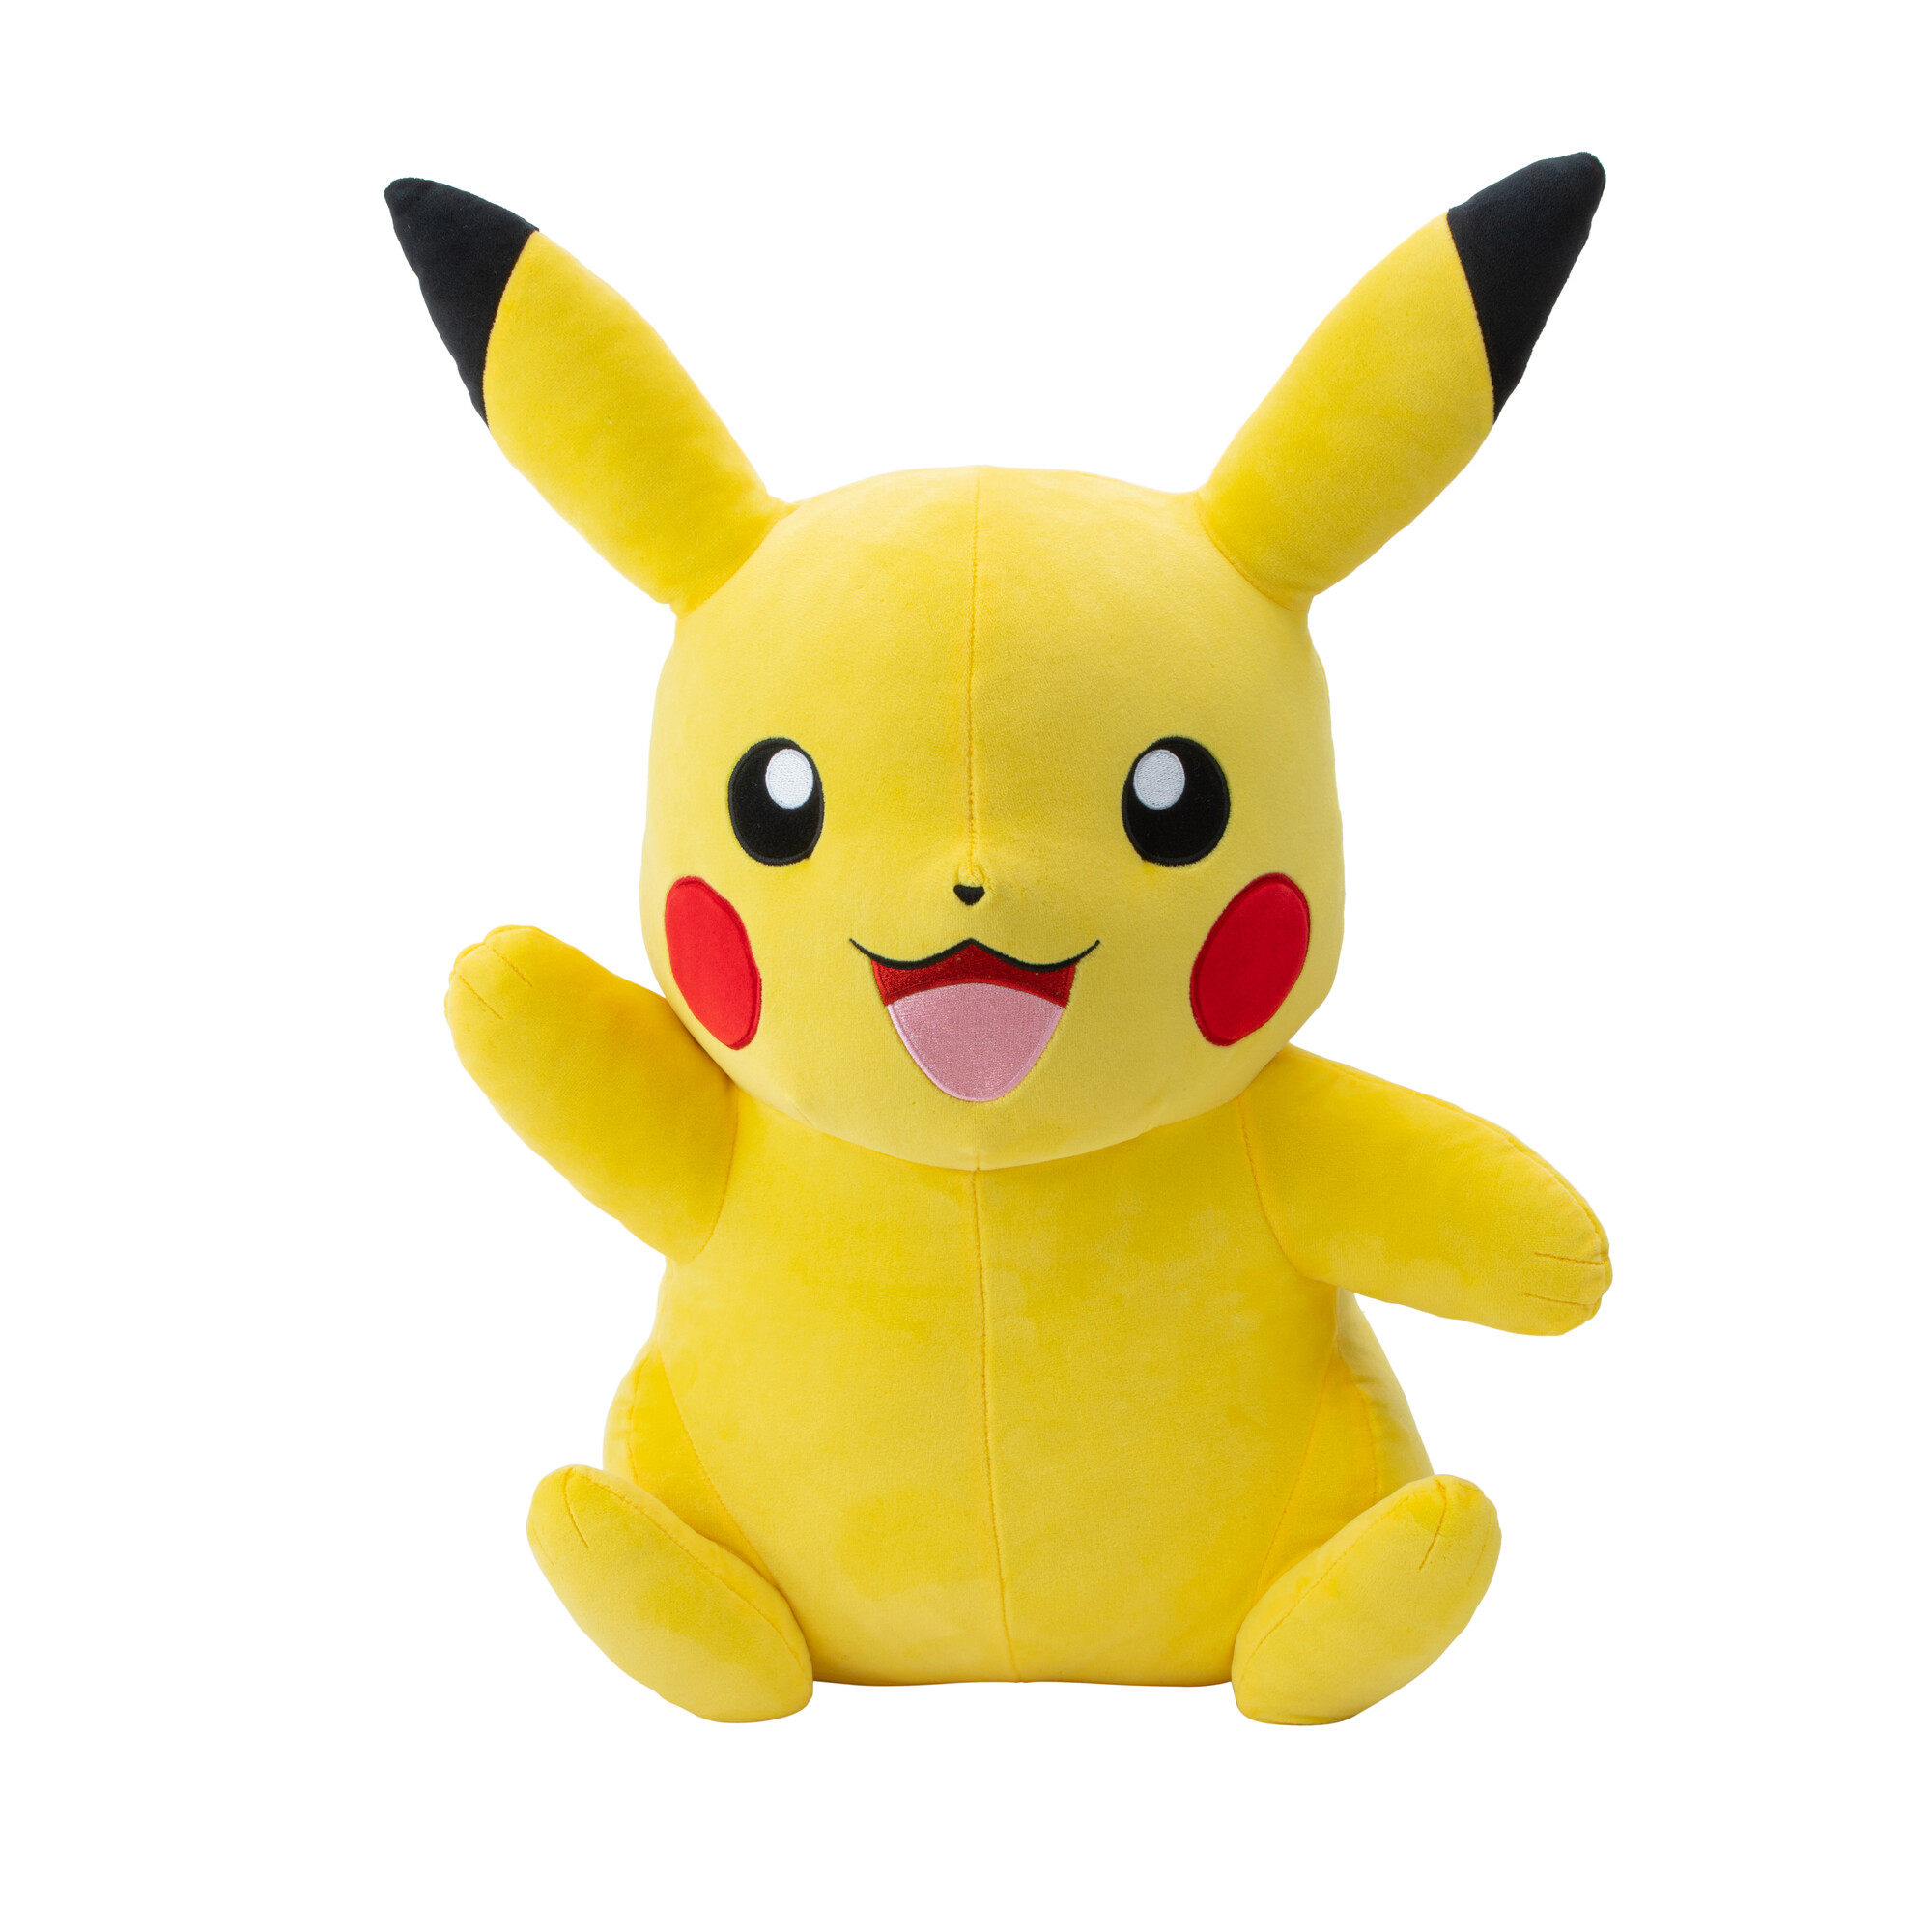 Pokemon Pikachu Plush - 24-inch Child's Plush with Authentic Details - image 1 of 5